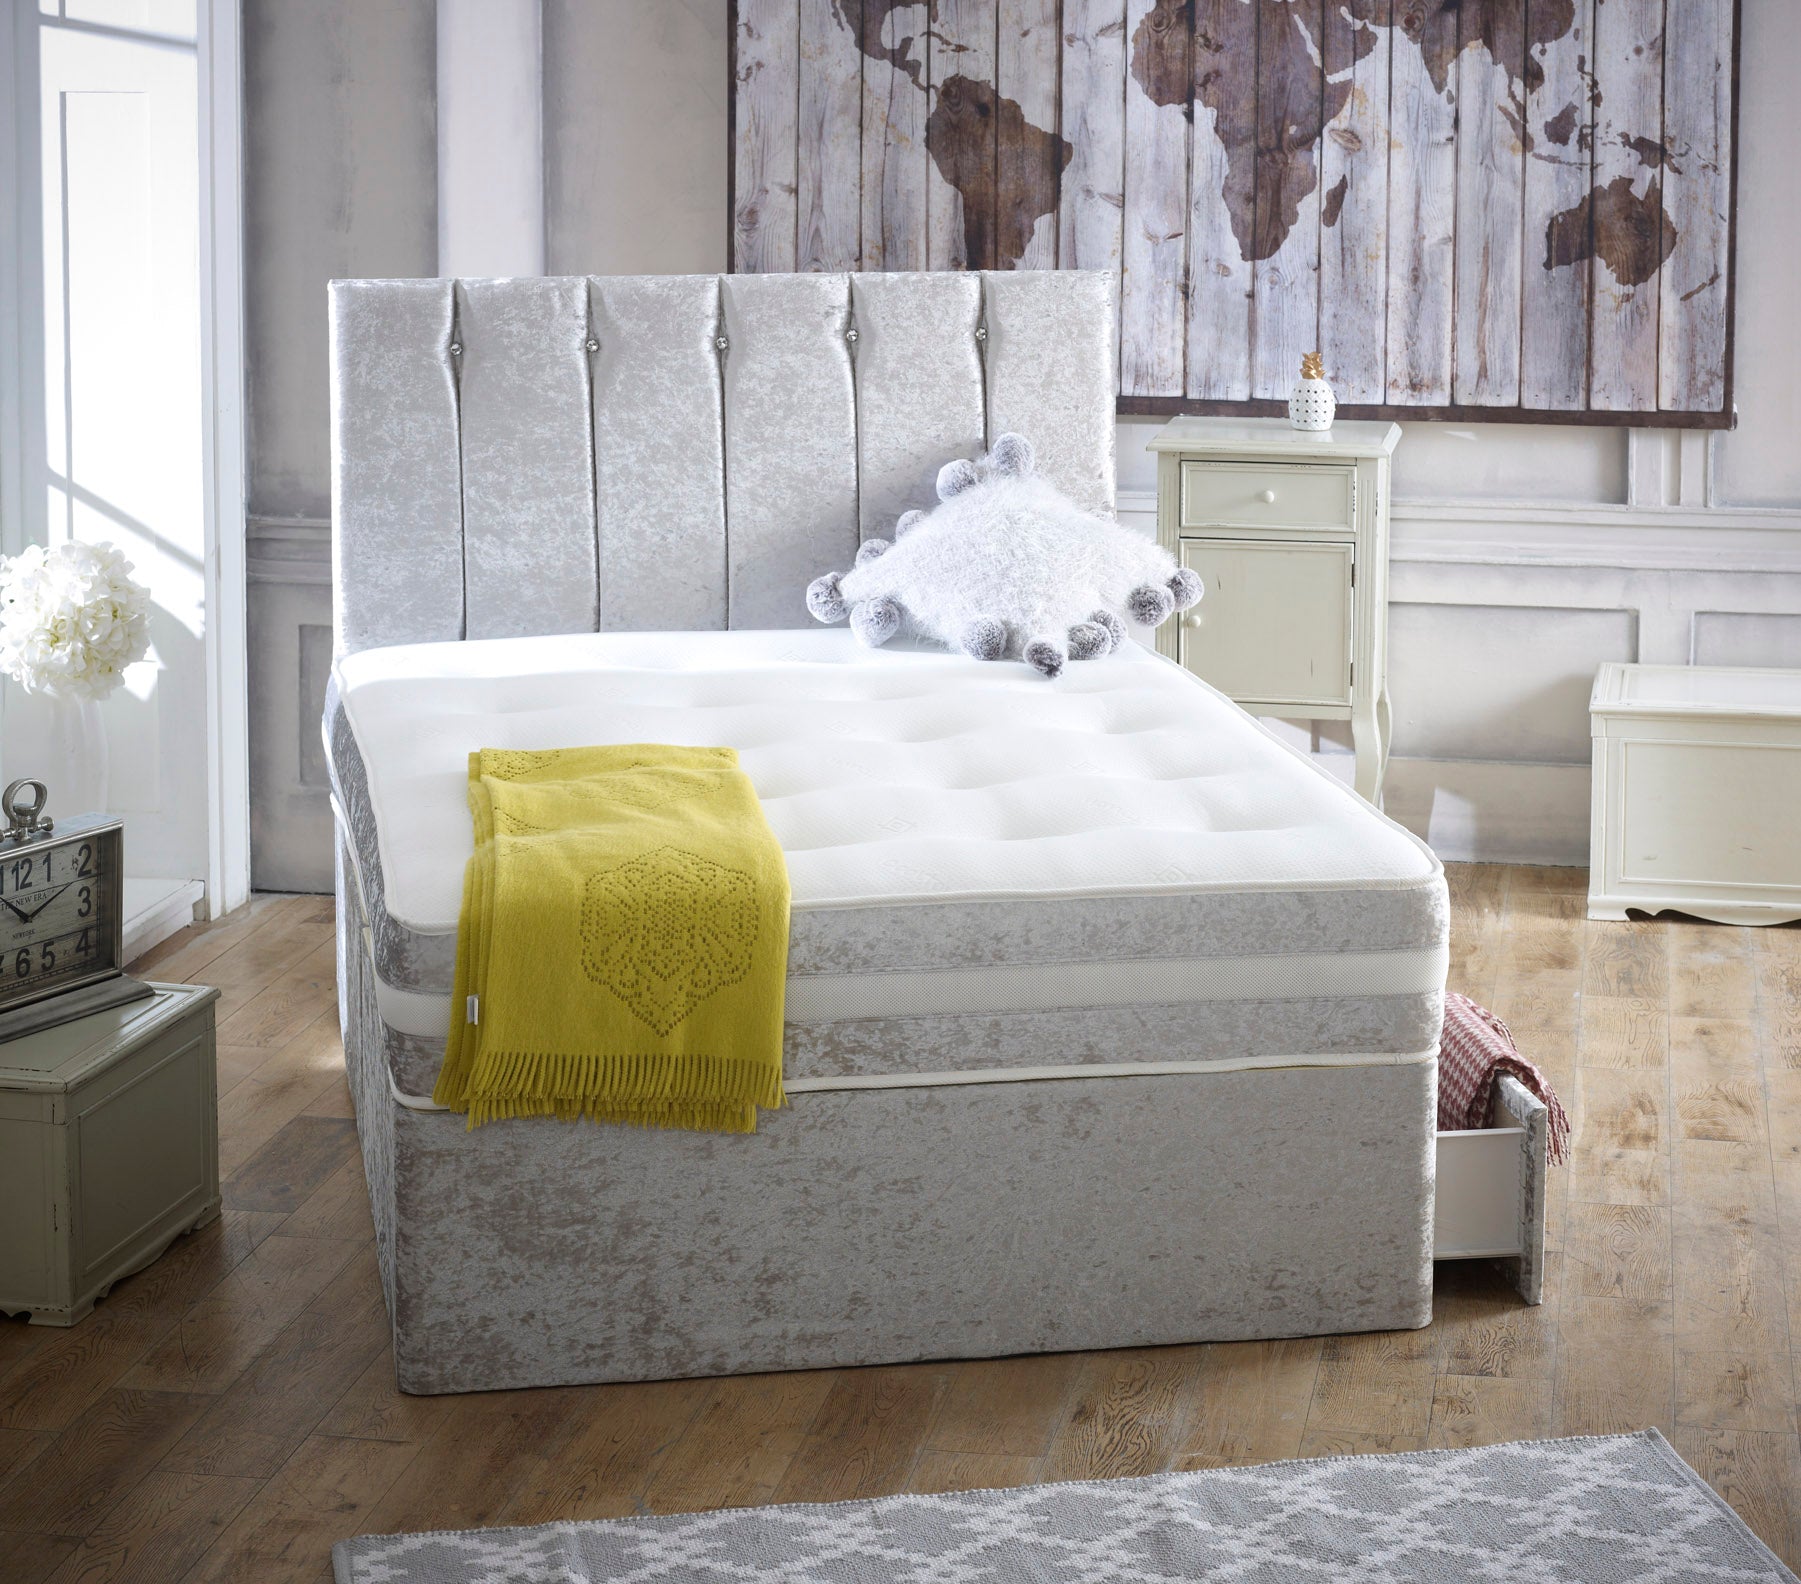 Florence Memory Divan Bed Set With Memory Sprung Mattress And Headboard